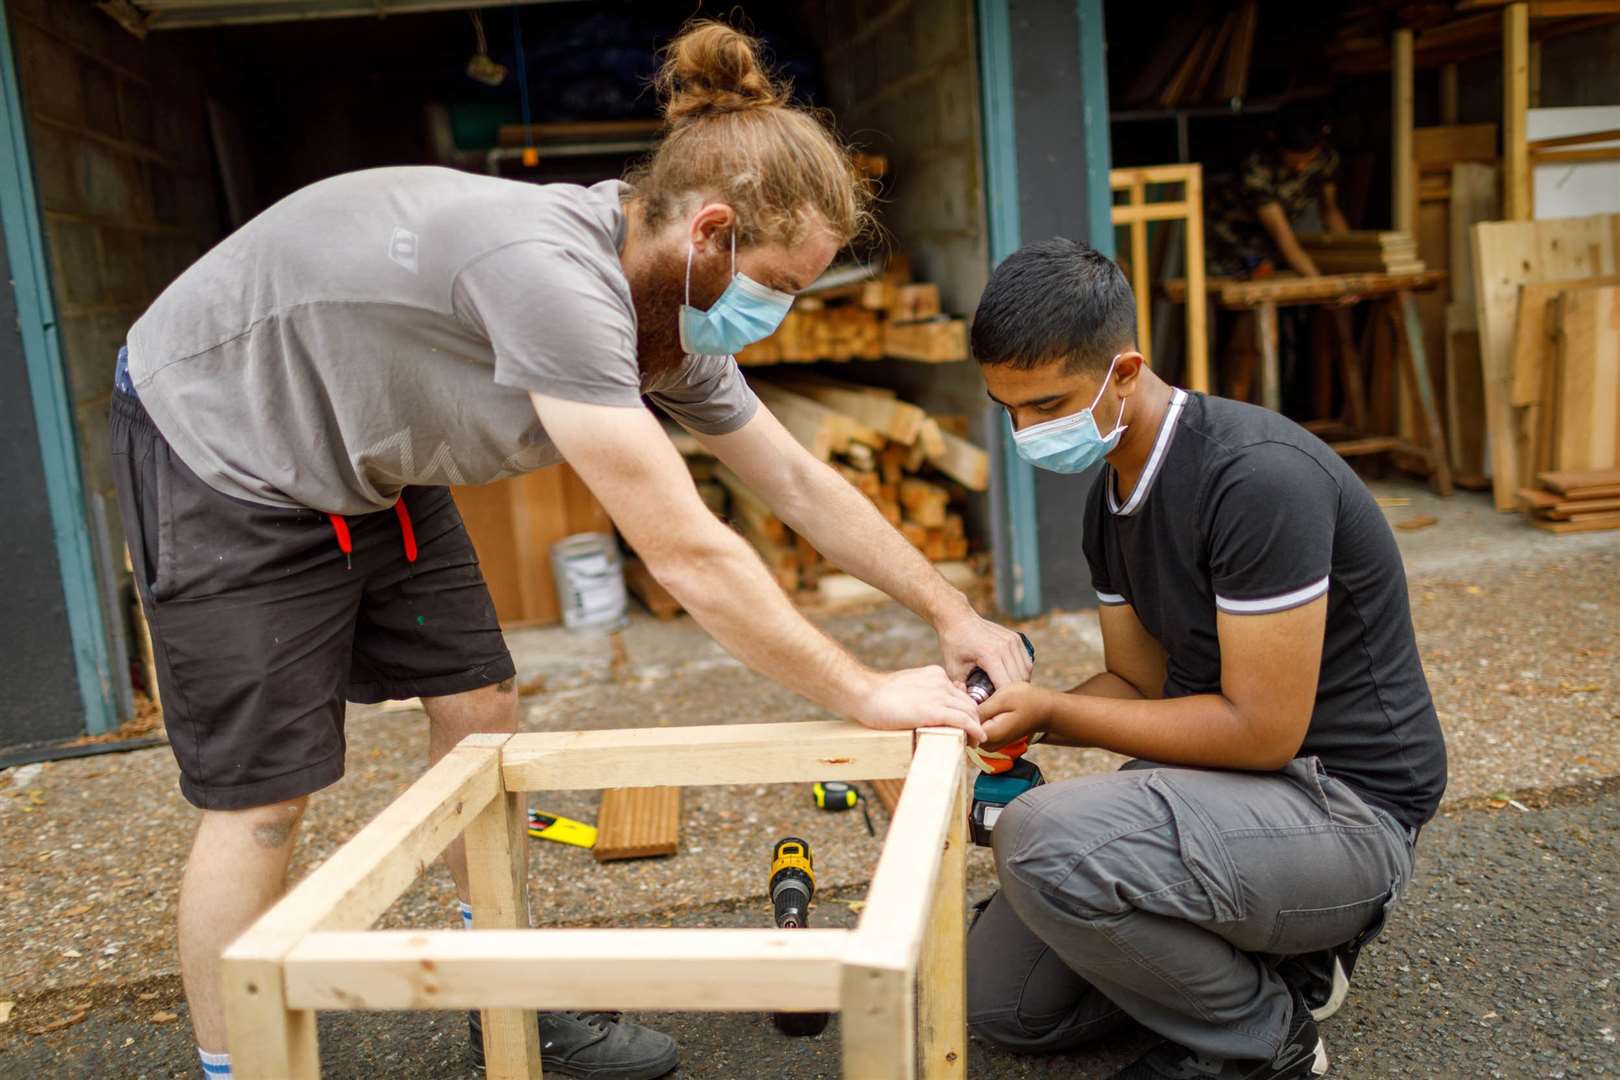 The Amber Foundation gives homeless and unemployed young people new skills